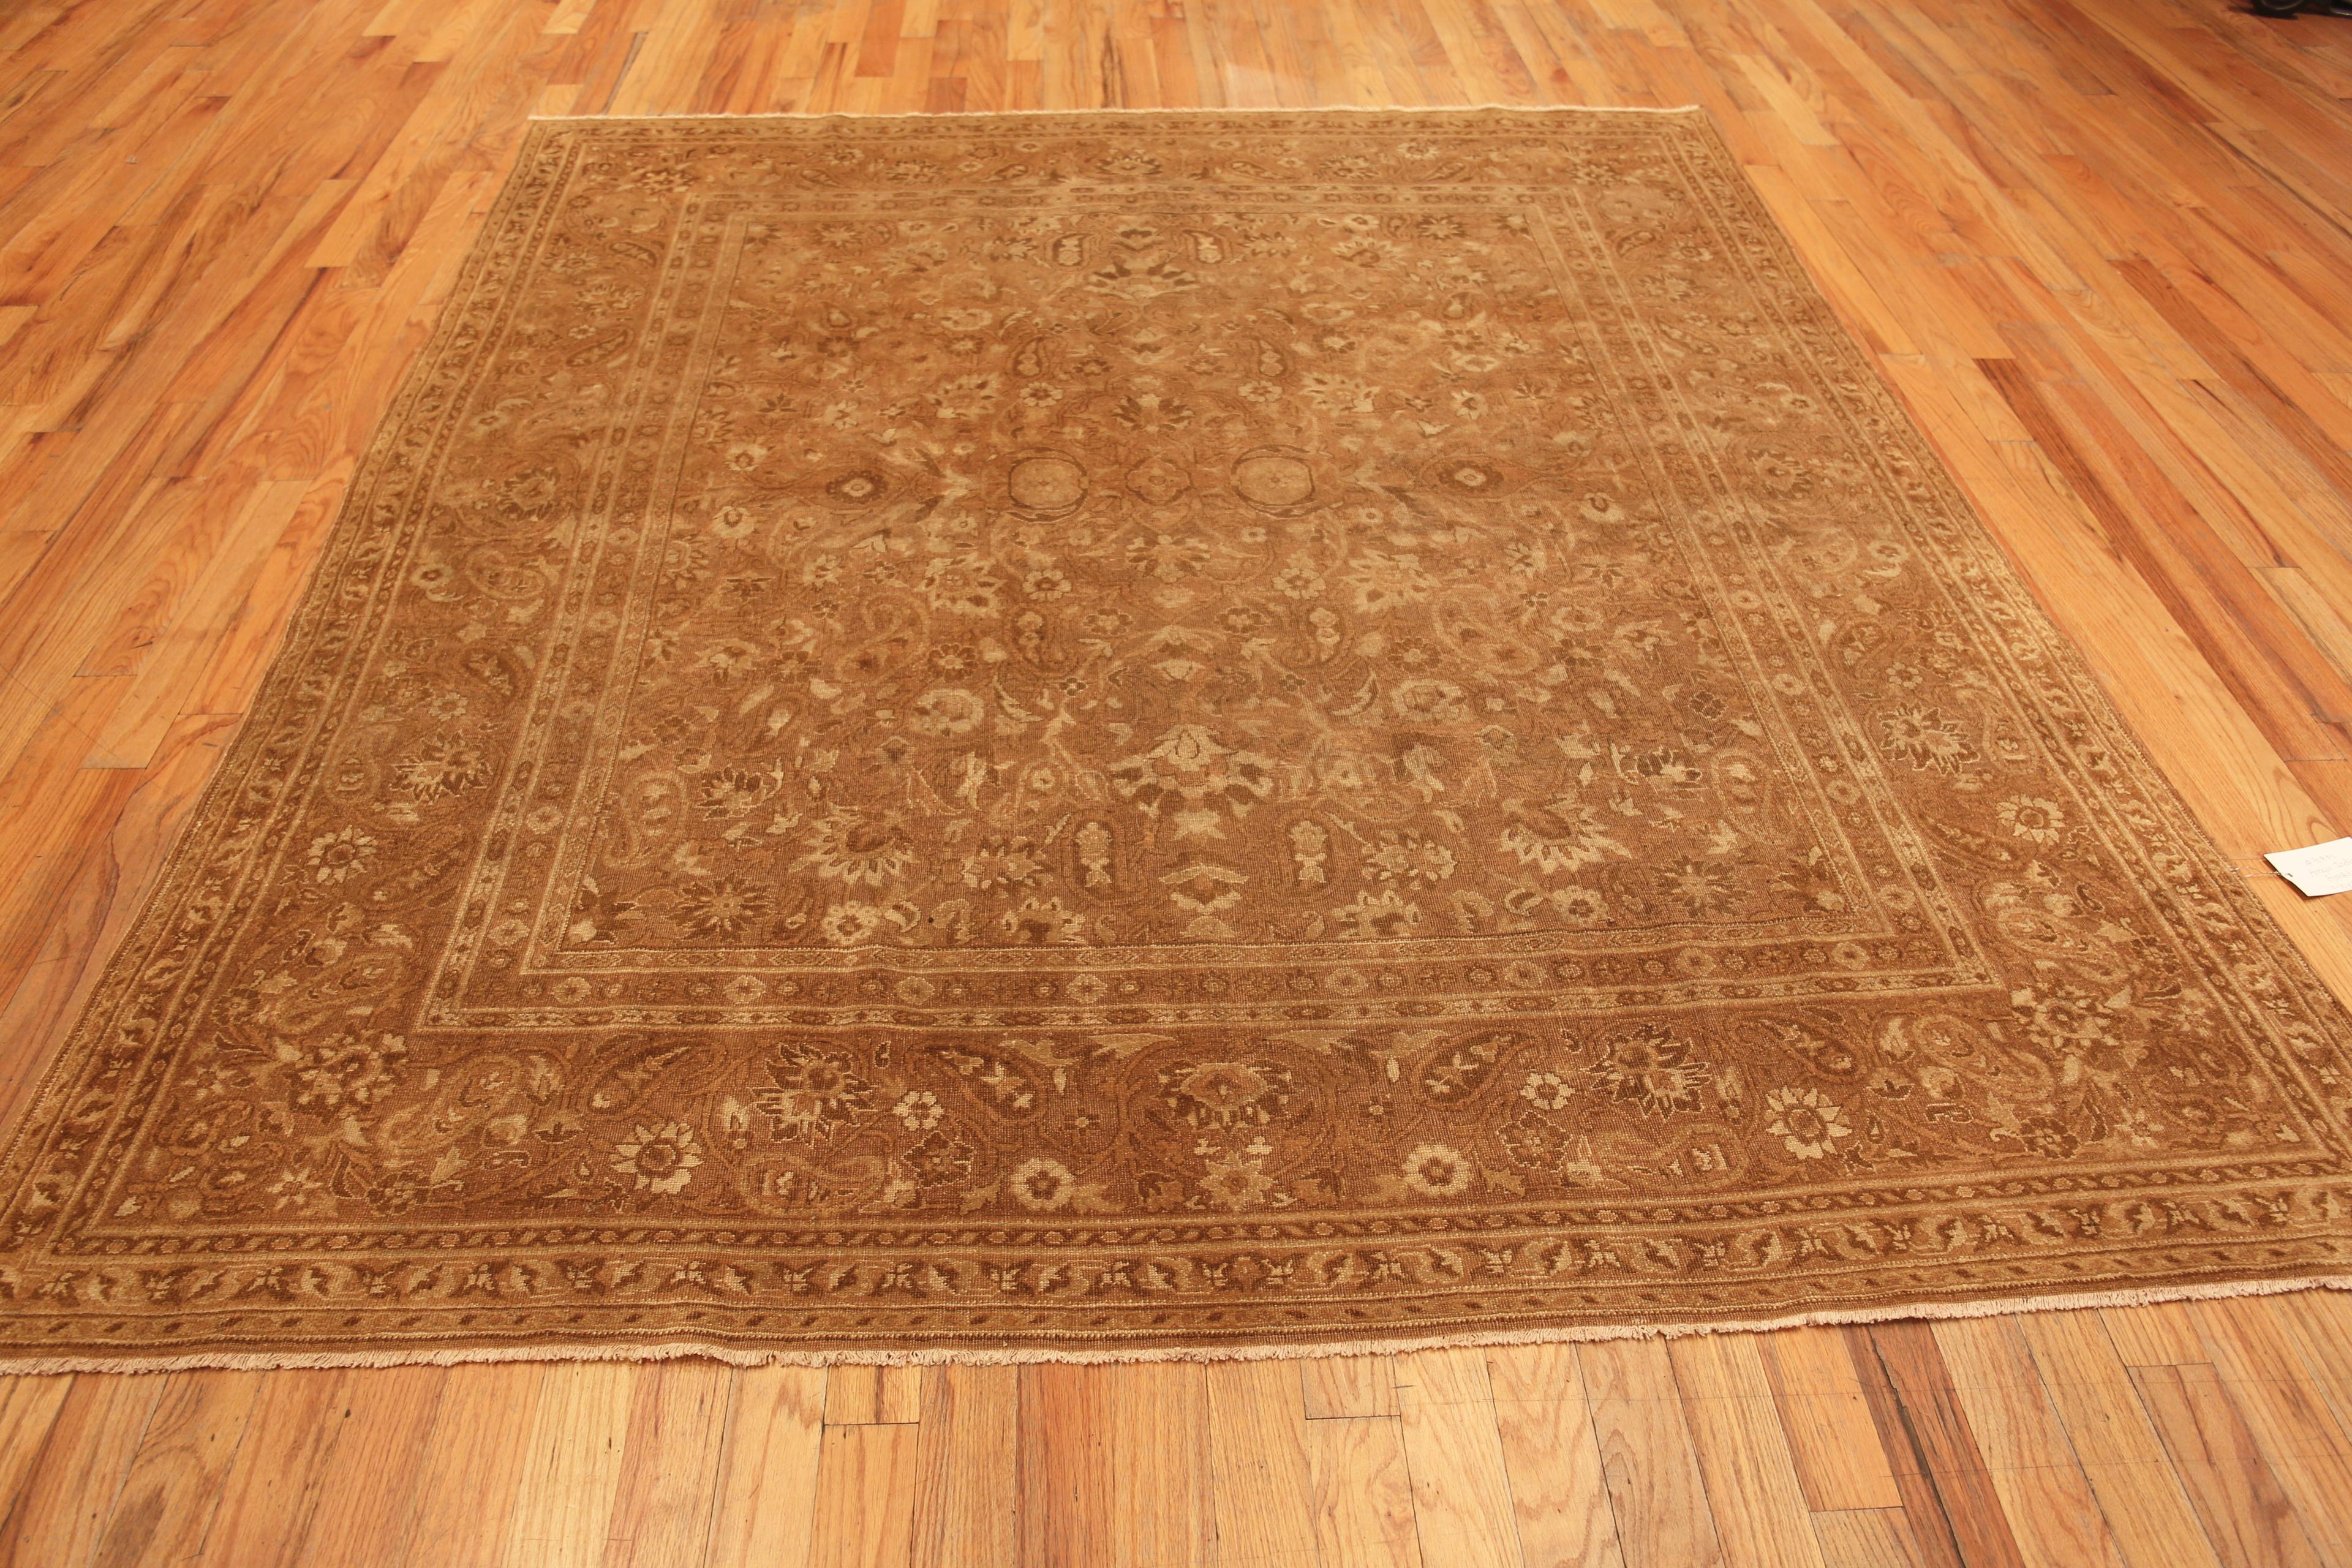 Antique Indian Amritsar Square Rug, Country of Origin: Indian Rugs, Circa date: 1900. Size: 7 ft 10 in x 8 ft 10 in (2.39 m x 2.69 m)